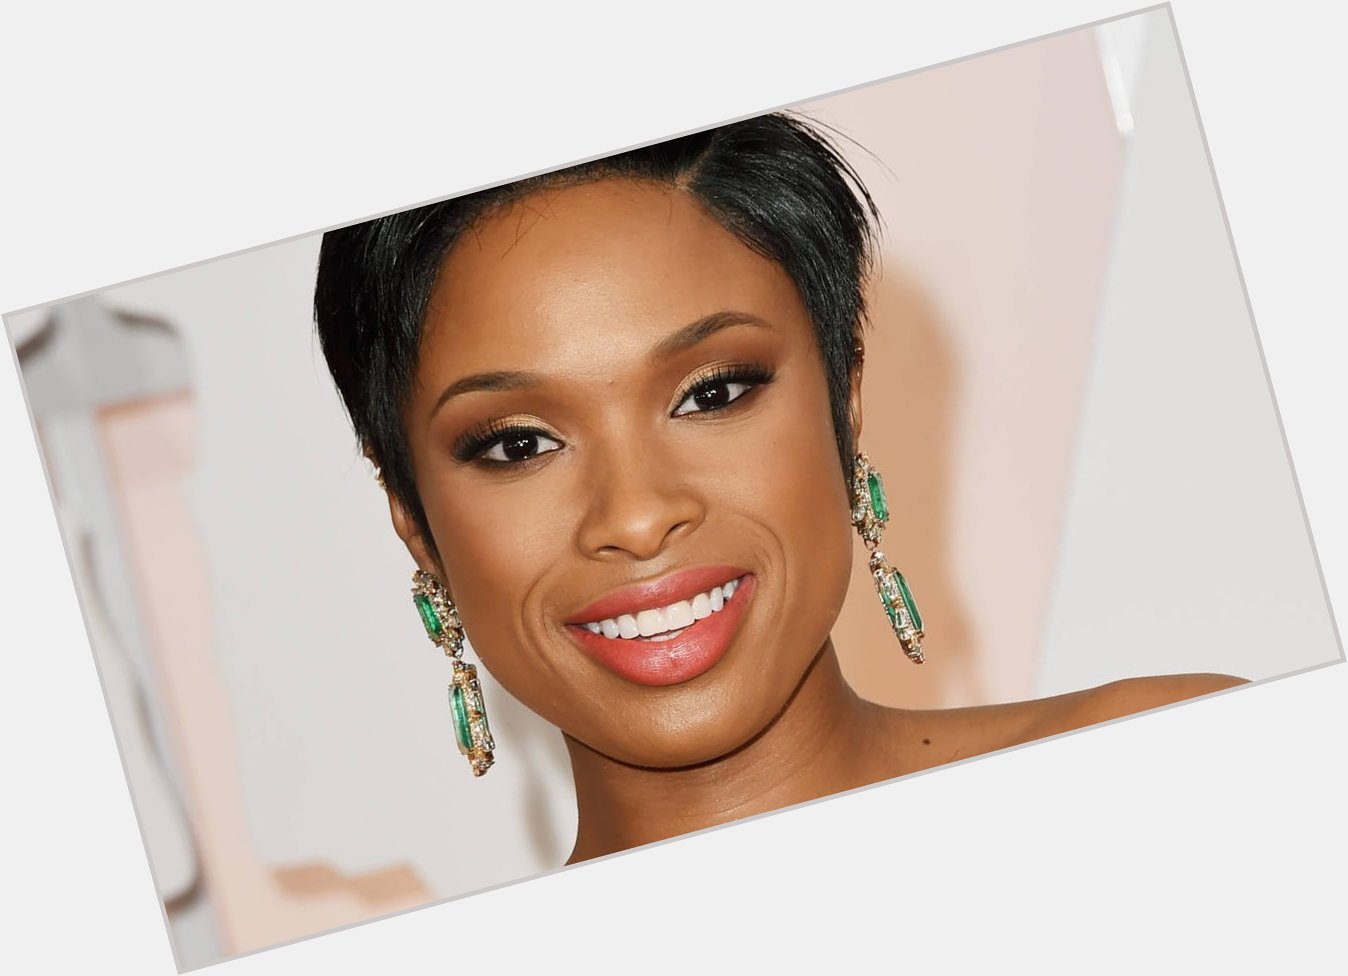 September 12, 2020
Happy birthday to American actress Jennifer Hudson 39 years old. 